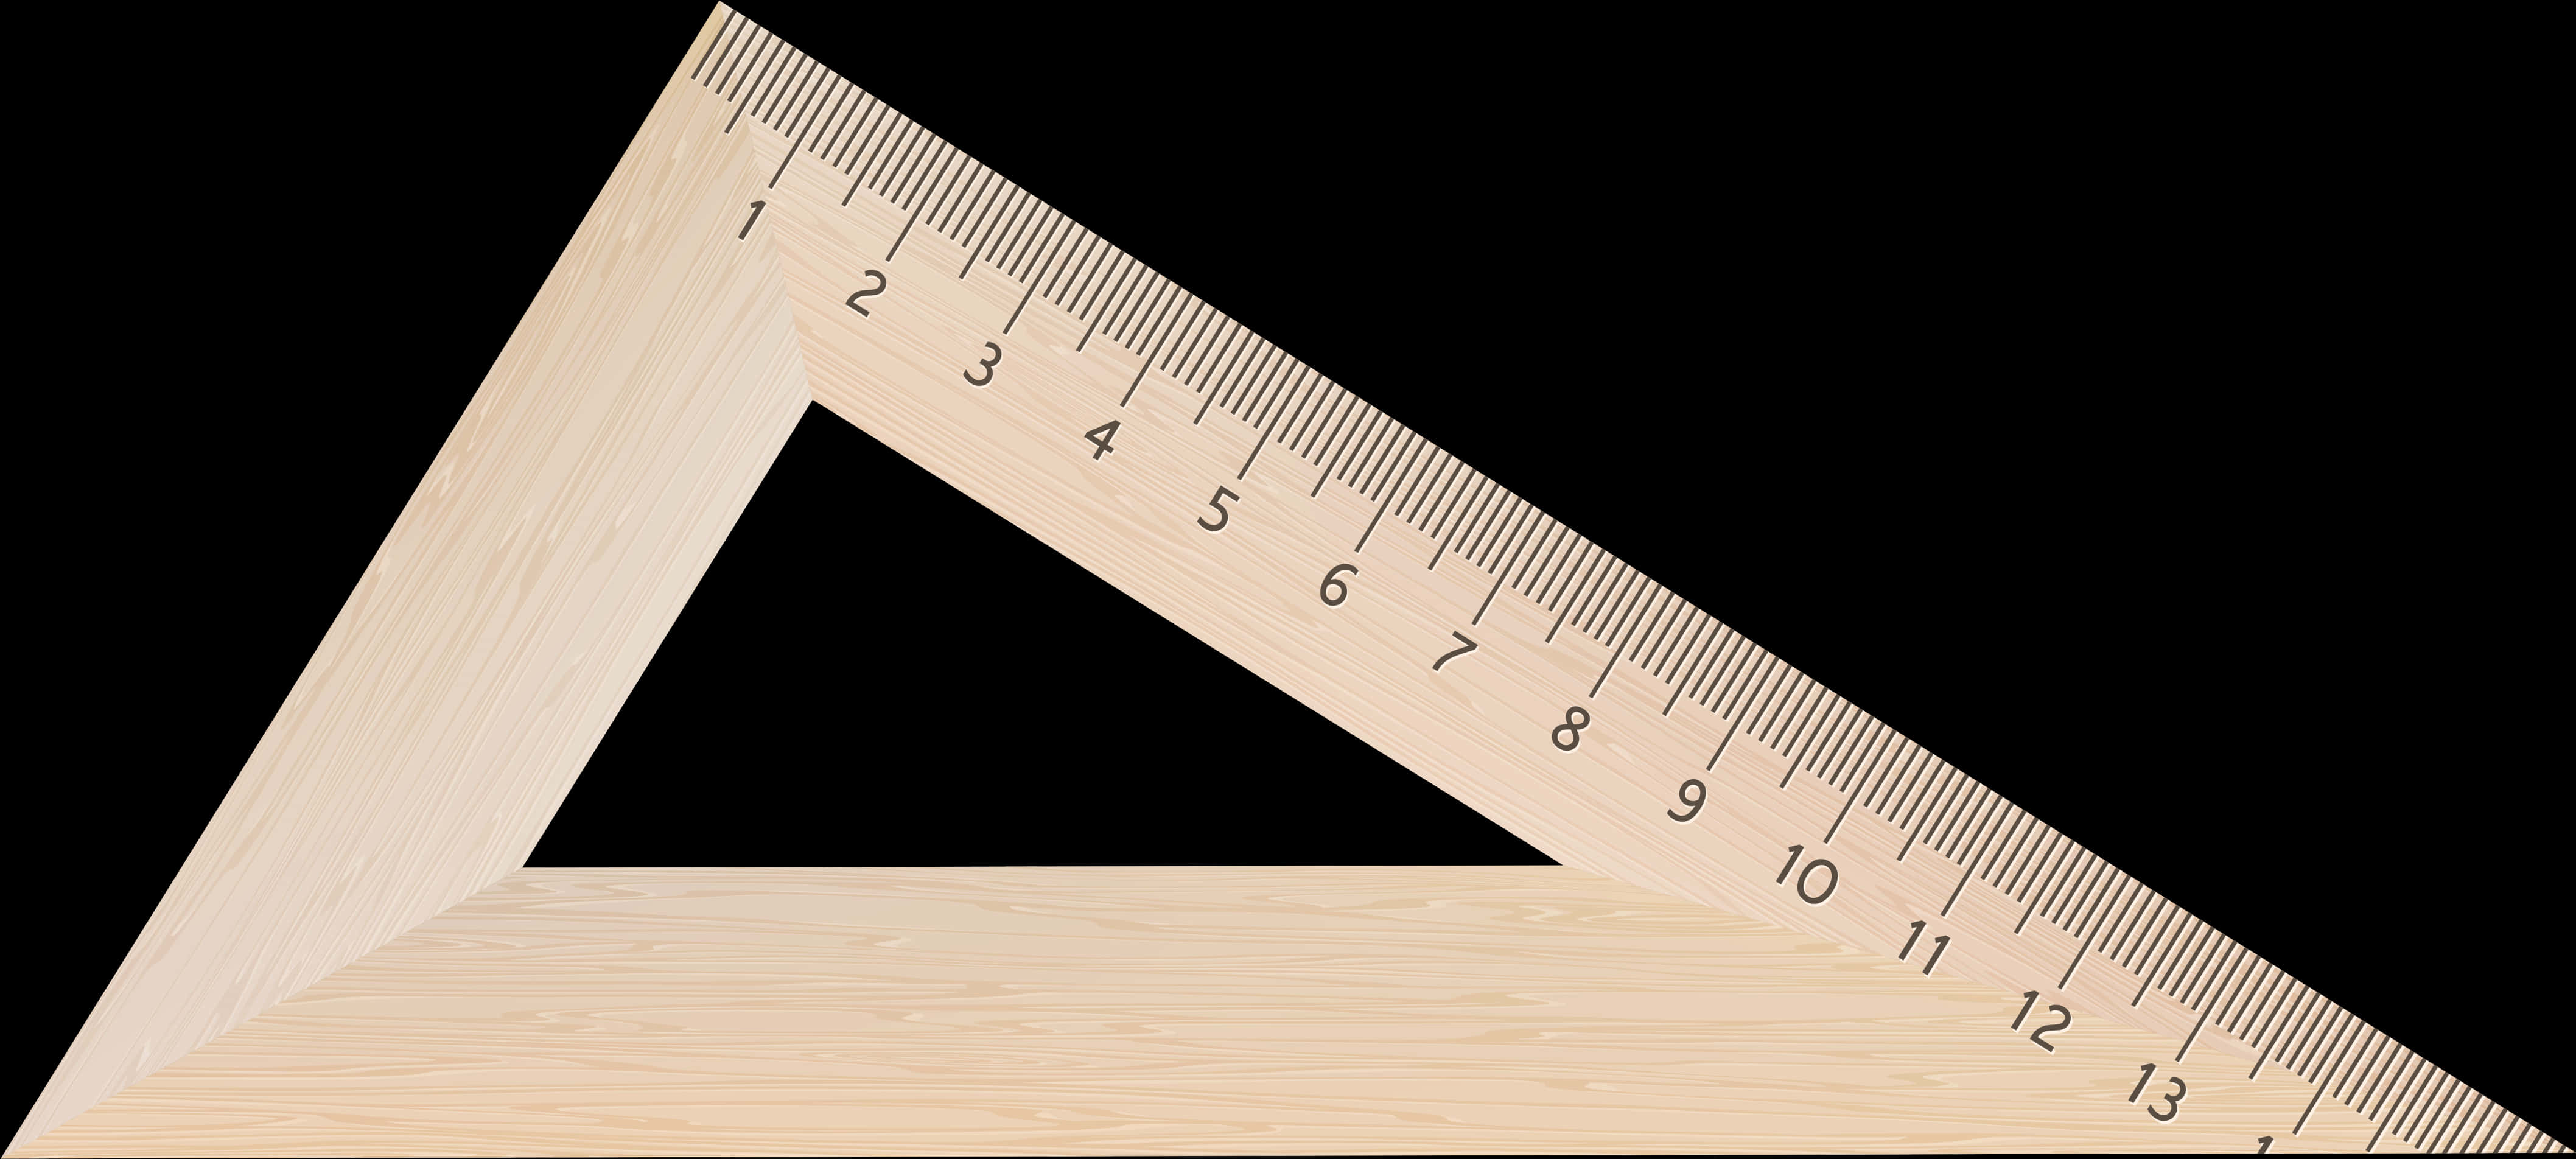 A Wooden Ruler With Numbers On It